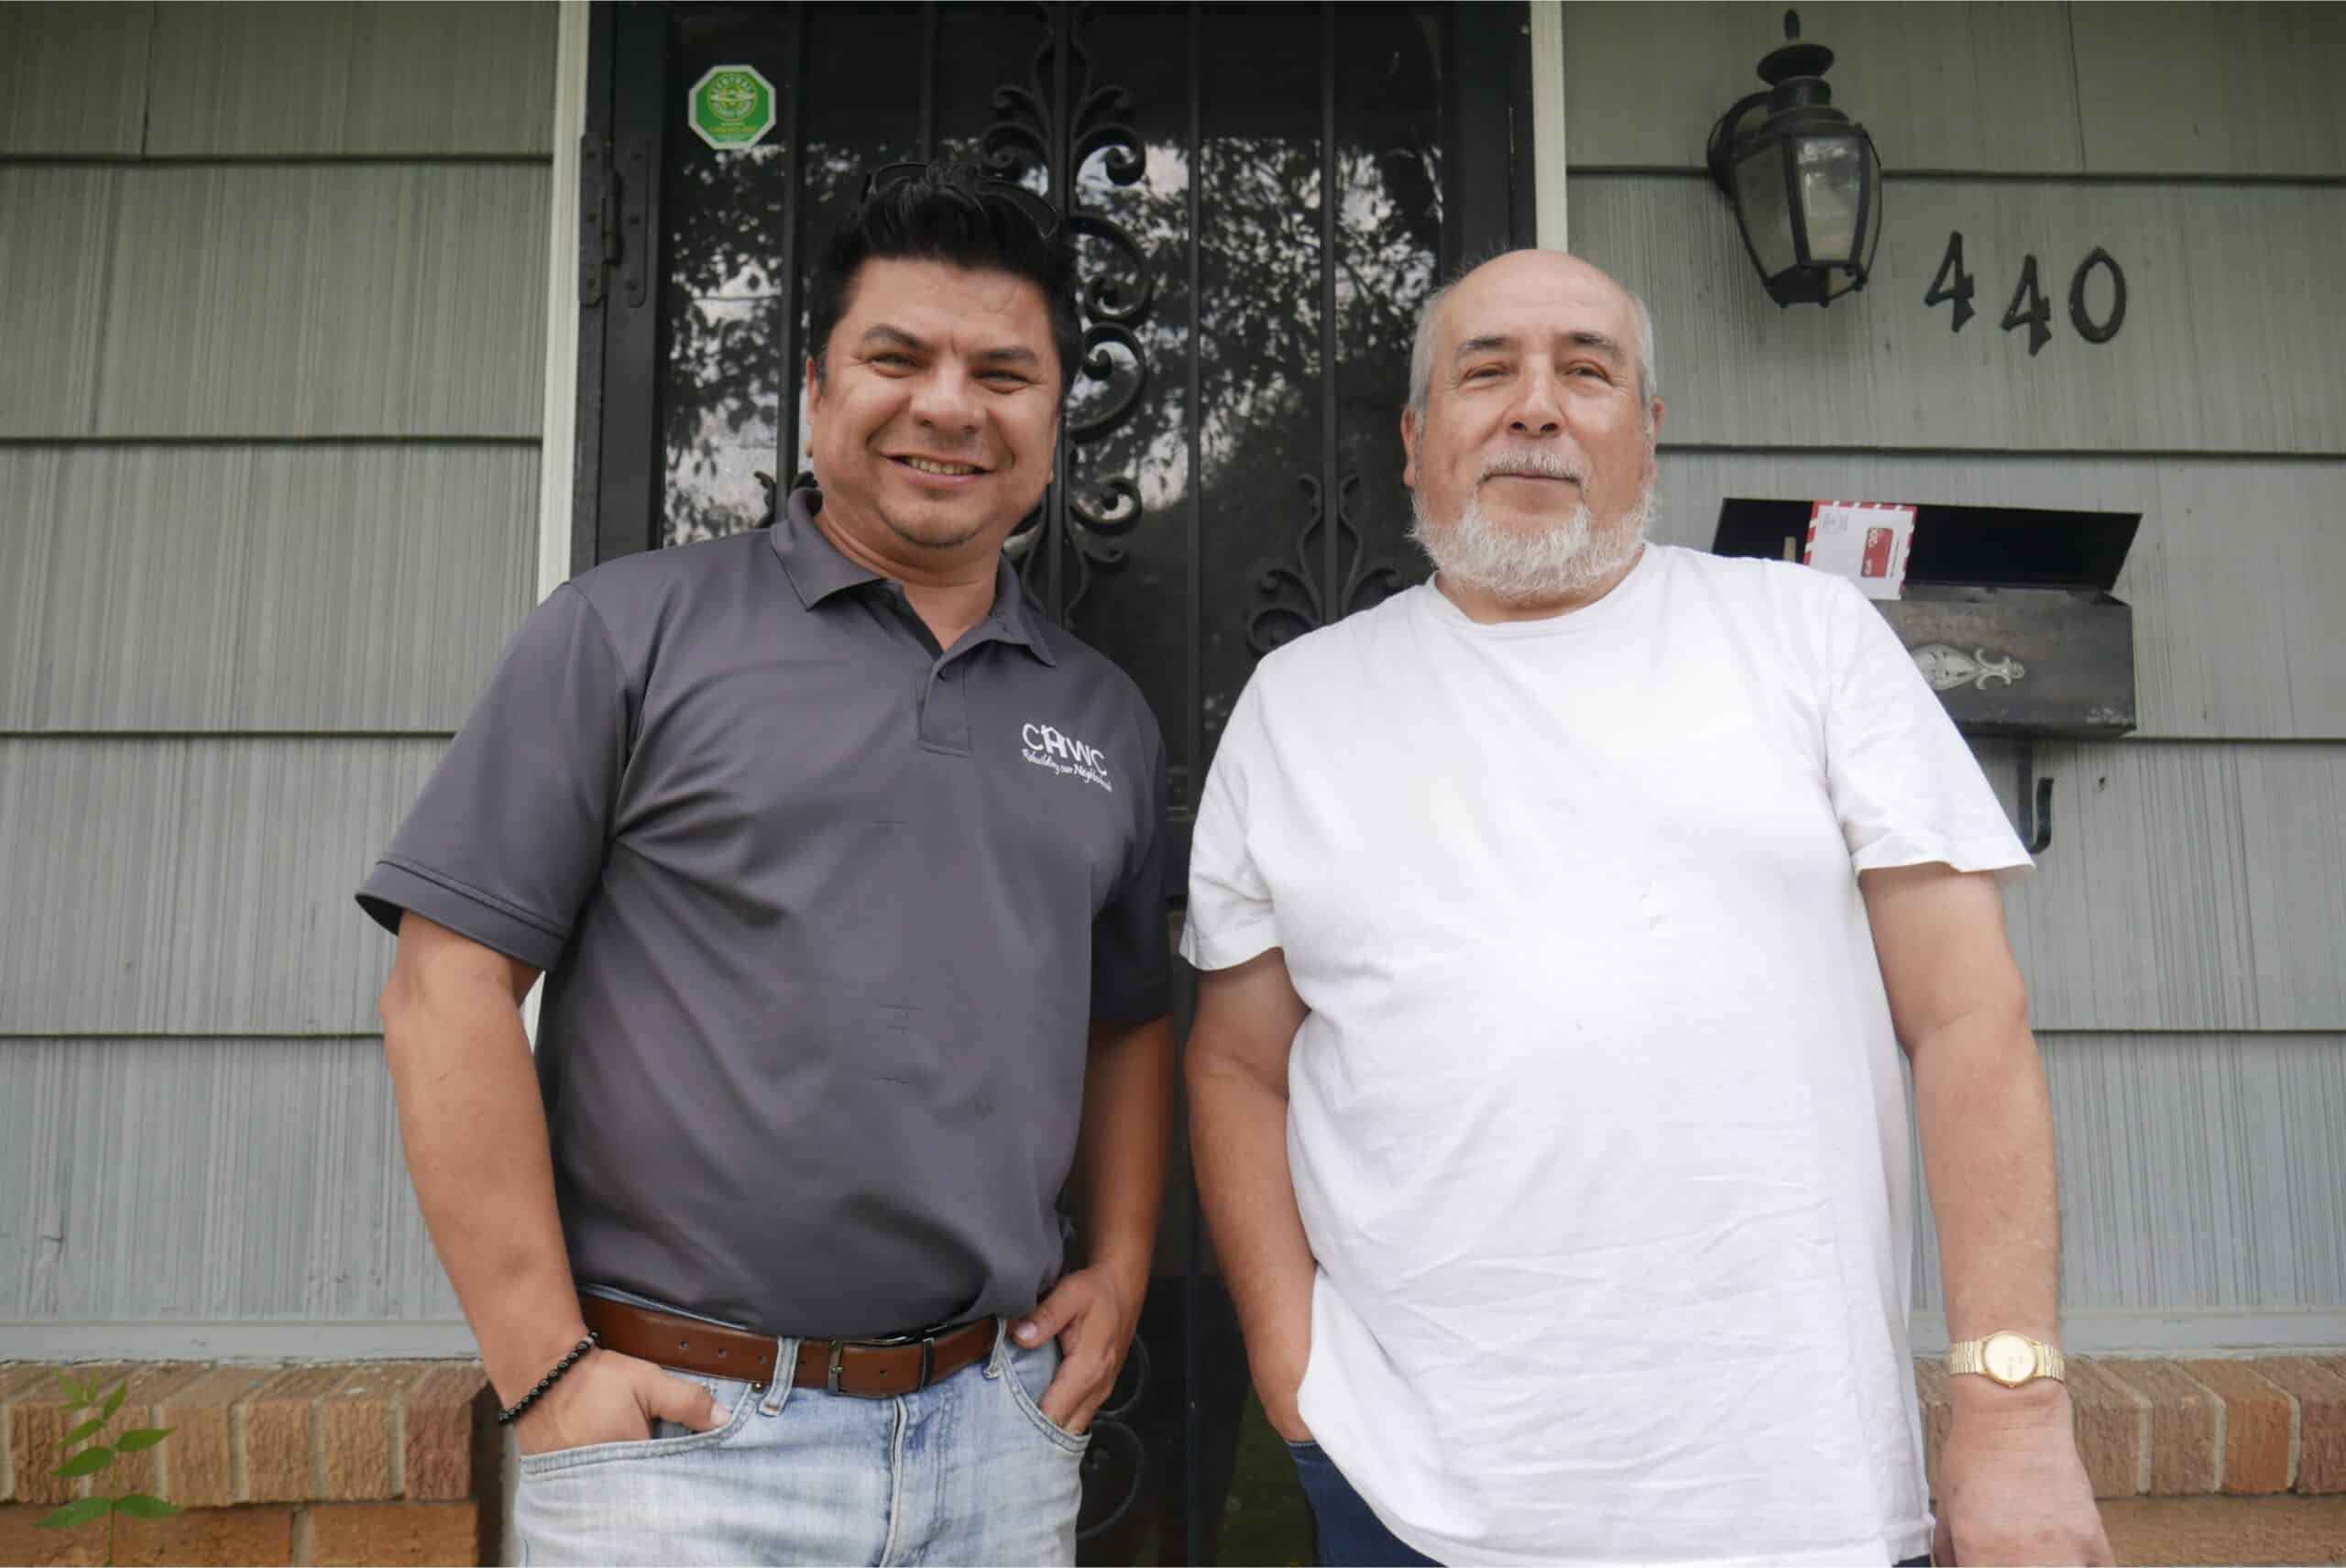 Lisandro, CHWC's housing counselor, and David, a KCK homeowner, stand on David's front porch.